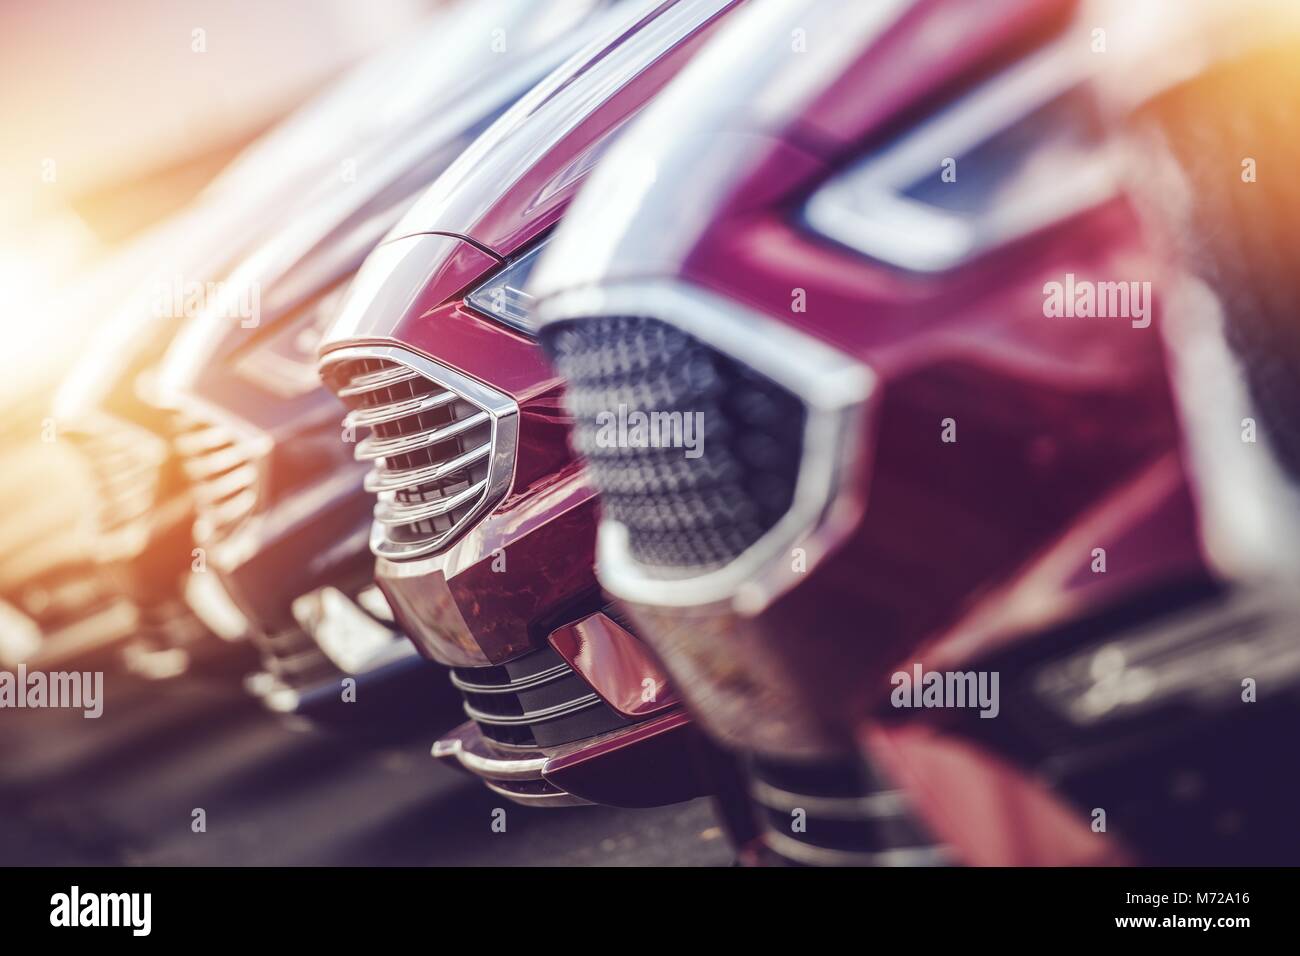 Automotive Industry Car Dealer Stock Closeup Photo. Modern Brand New Vehicles For Sale. Stock Photo